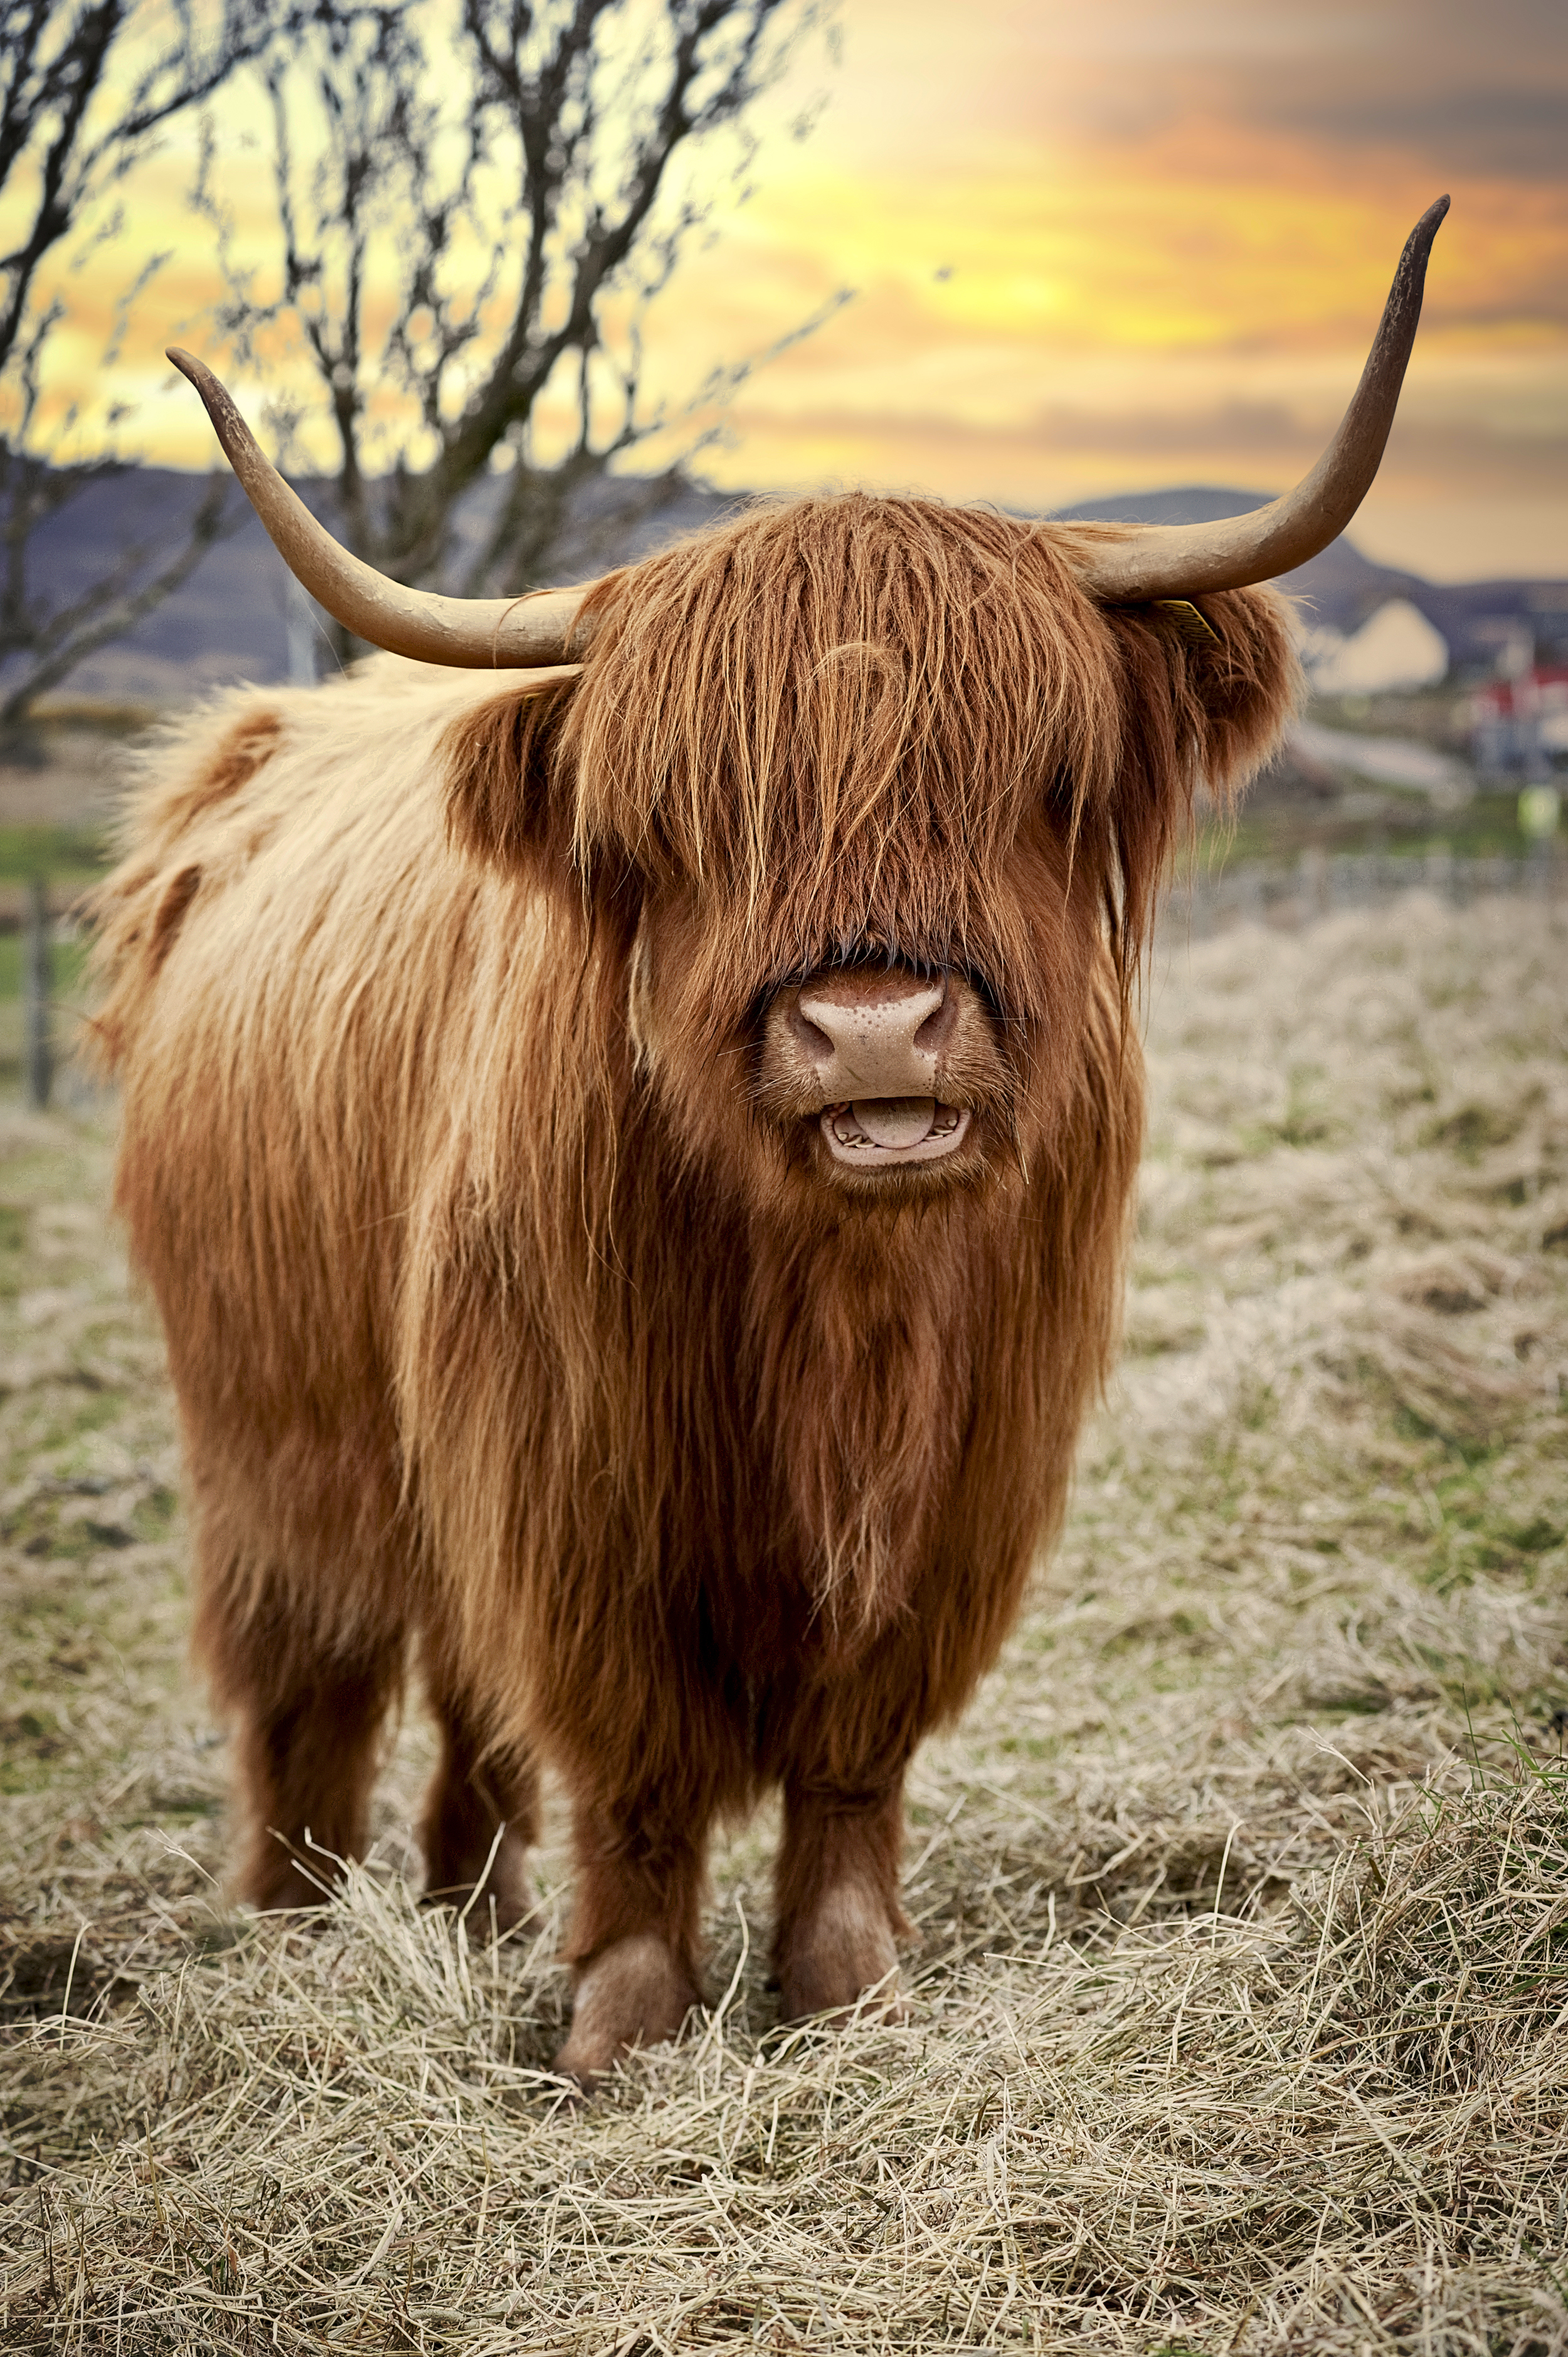 A Highland cow with long hair and large curved horns stands in a grassy field at sunset